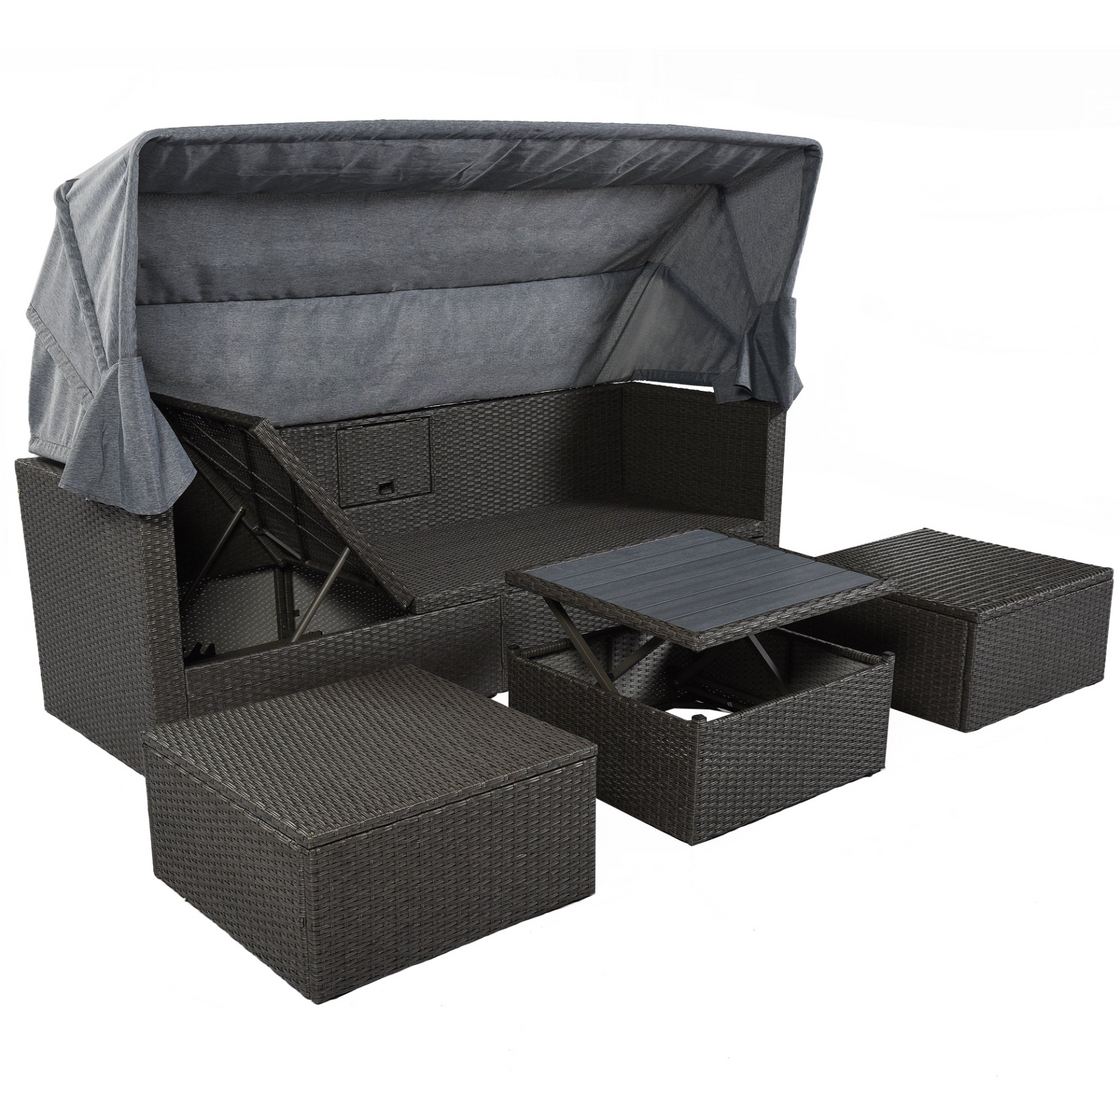 Outdoor Patio Rectangle Daybed with Retractable Canopy - Wicker Furniture Sectional Seating with Washable Cushions for Backyard and Porch